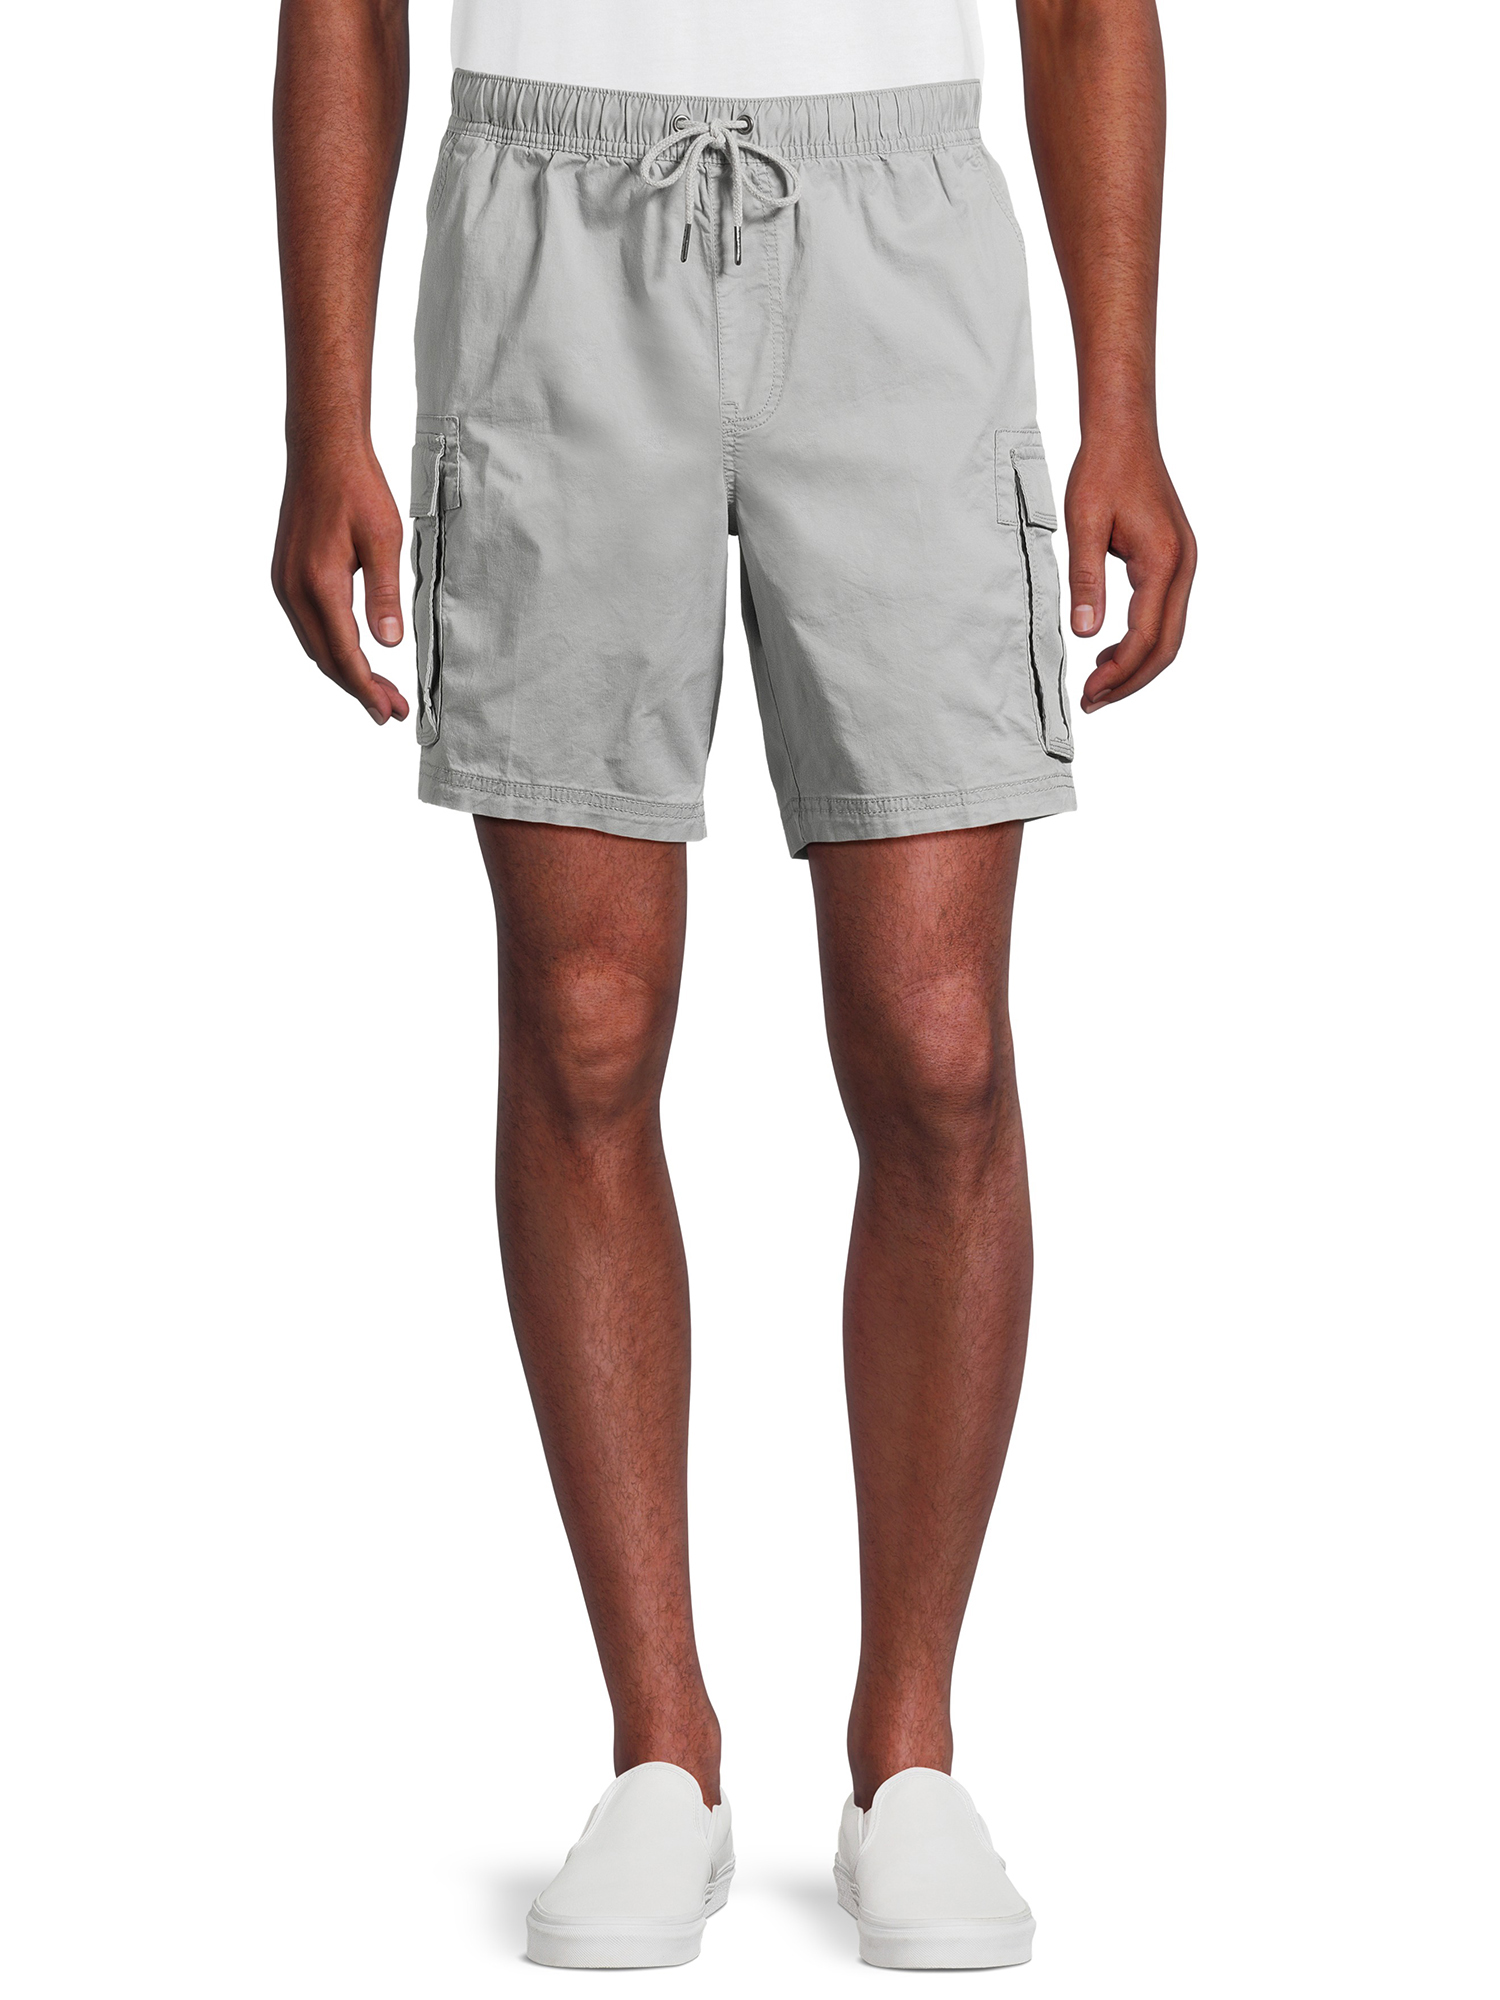 George Men's and Big Men's Pull On Cargo Shorts, Sizes S-2XL